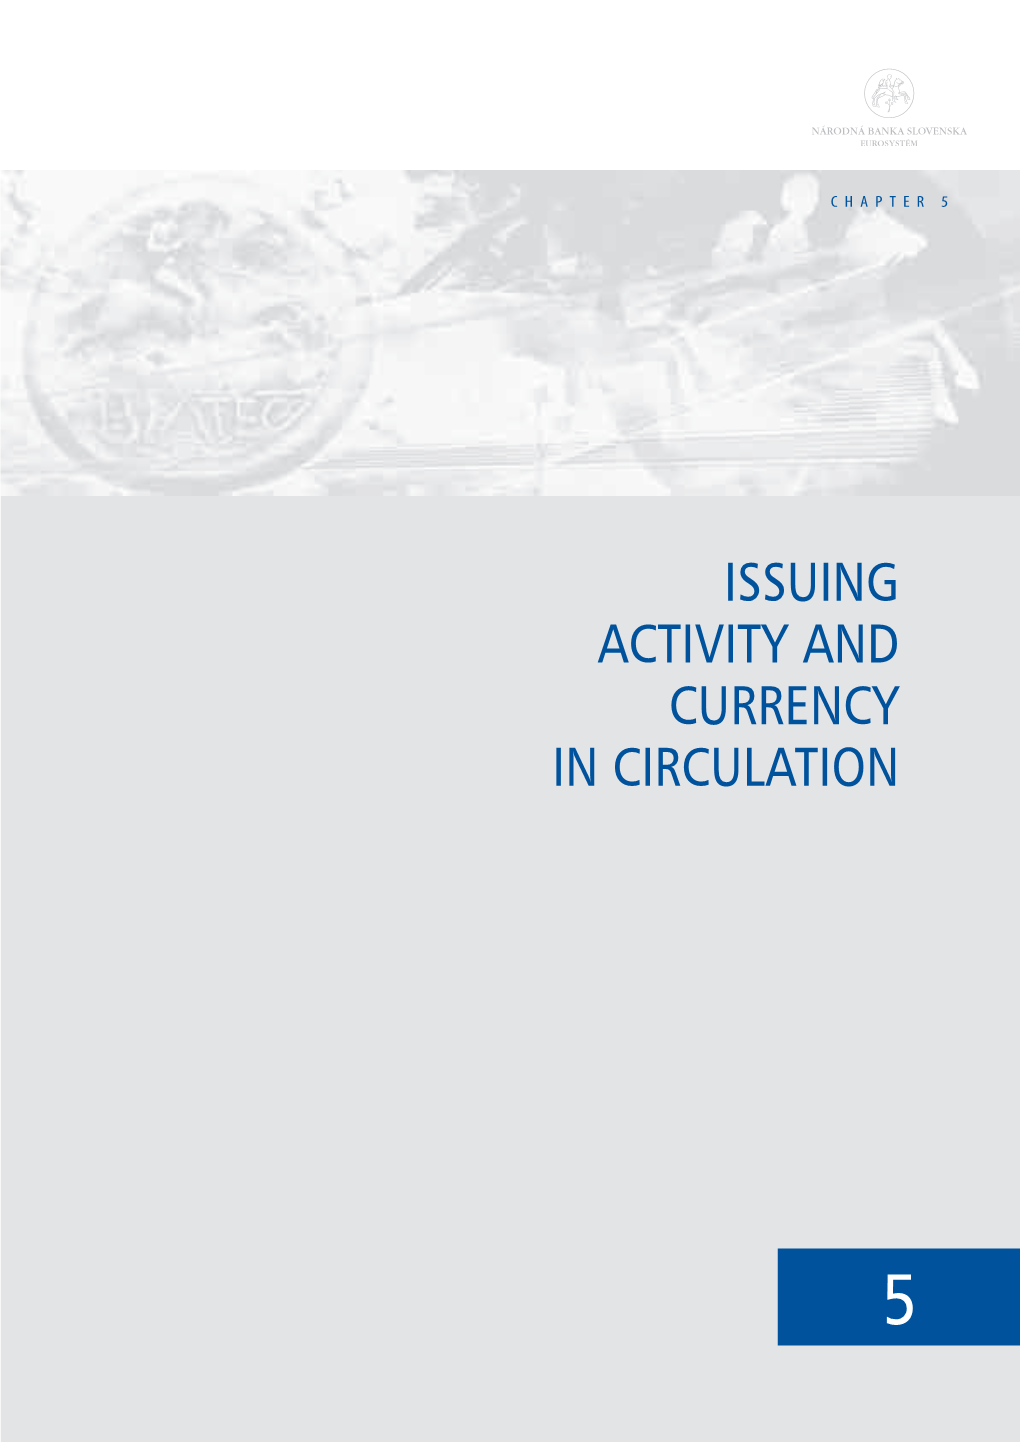 5. Issuing Activity and Currency in Circulation